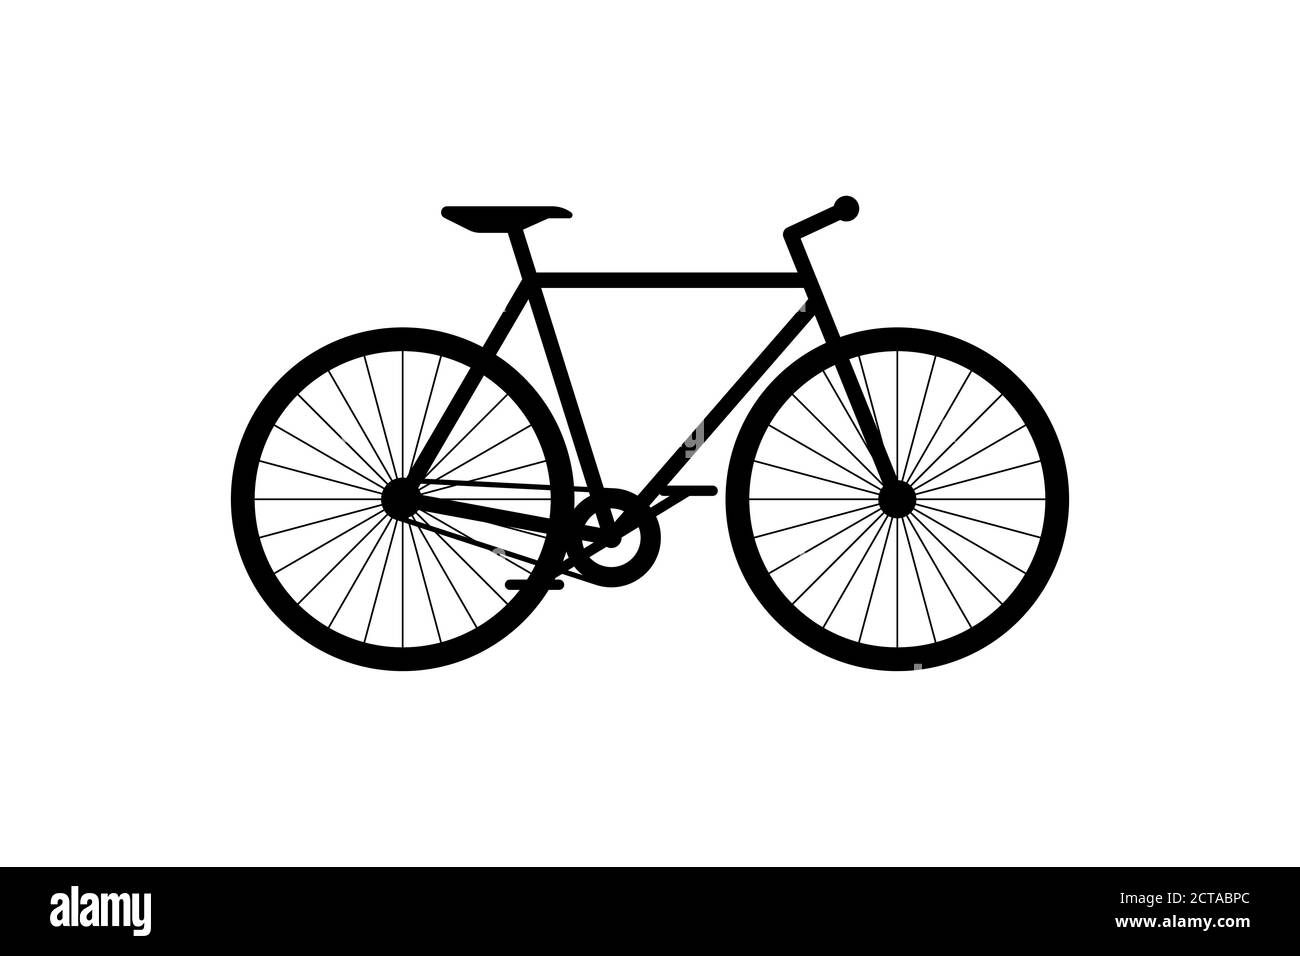 Bicycle black icon. Cycle silhouette sign on white background ...